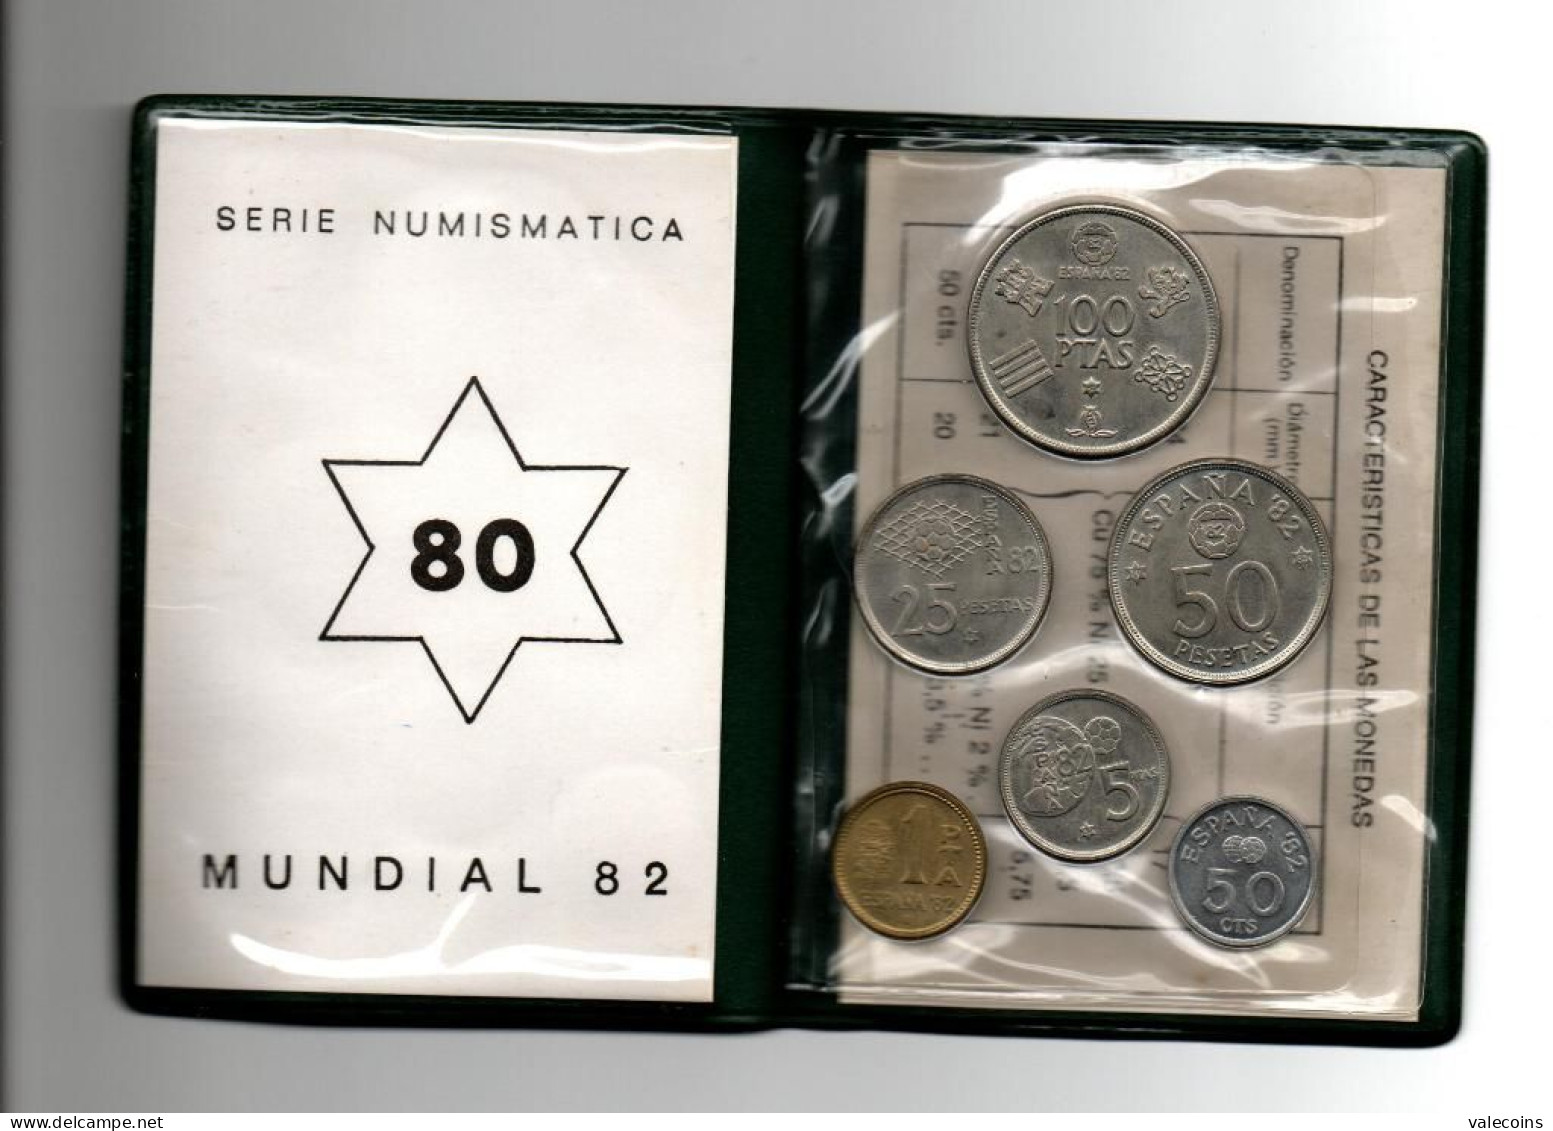 Spagna España Spain - 1982 - 6 COINS - Football Soccer Mundial Mondiale - KMS OFFICIAL ISSUE - LIMITED ISSUE - Ongebruikte Sets & Proefsets